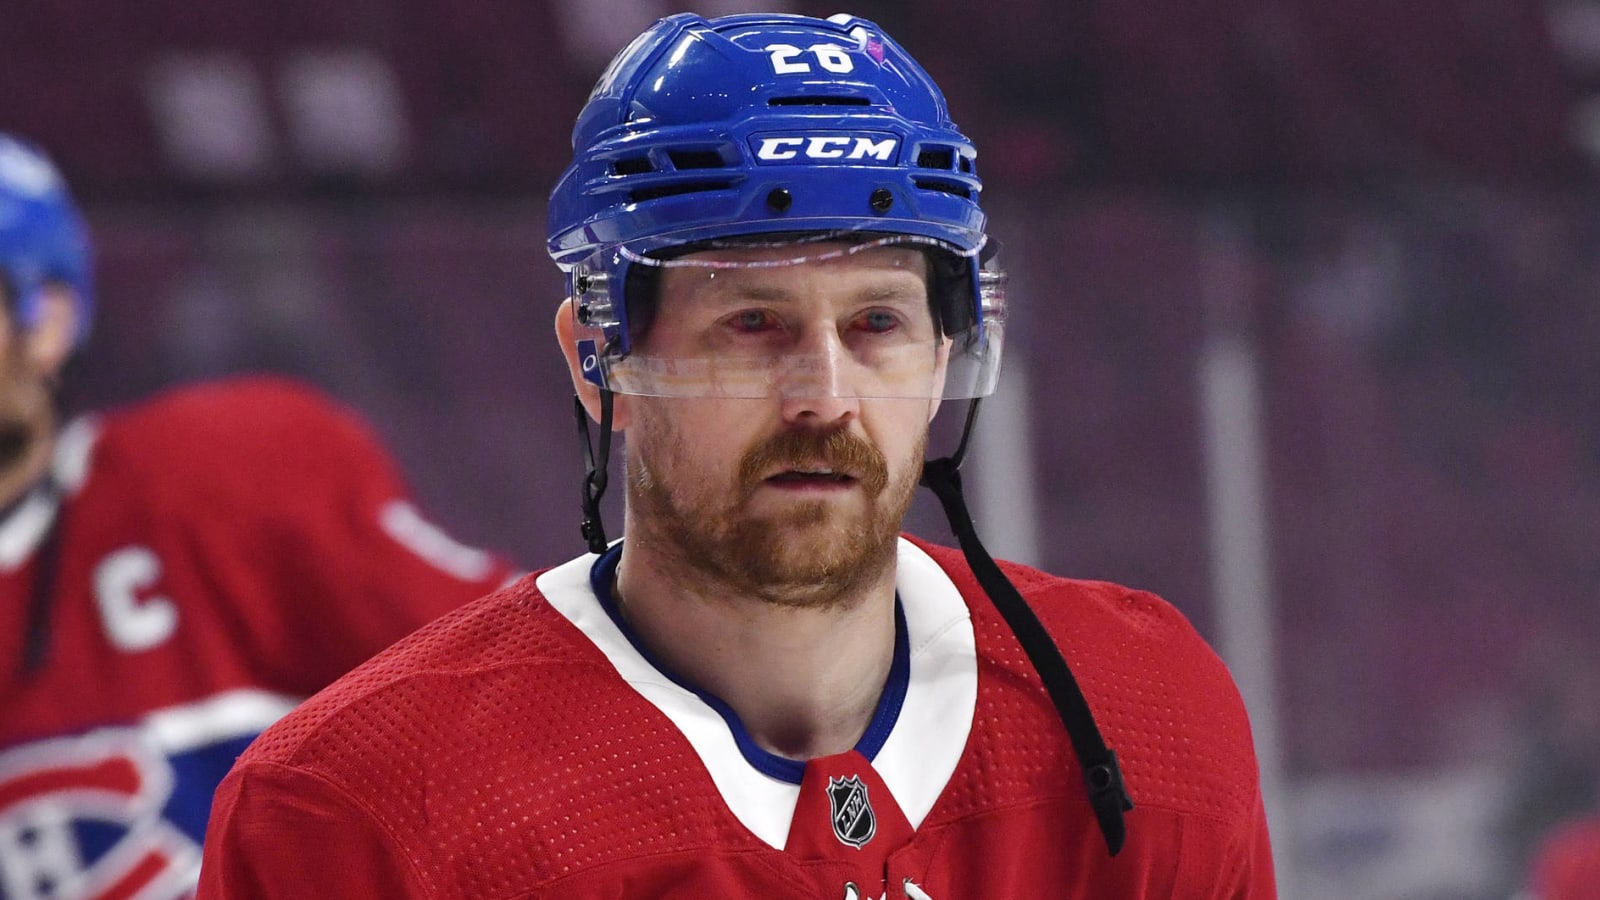 Jeff Petry explains why eyes were bloodshot during playoffs